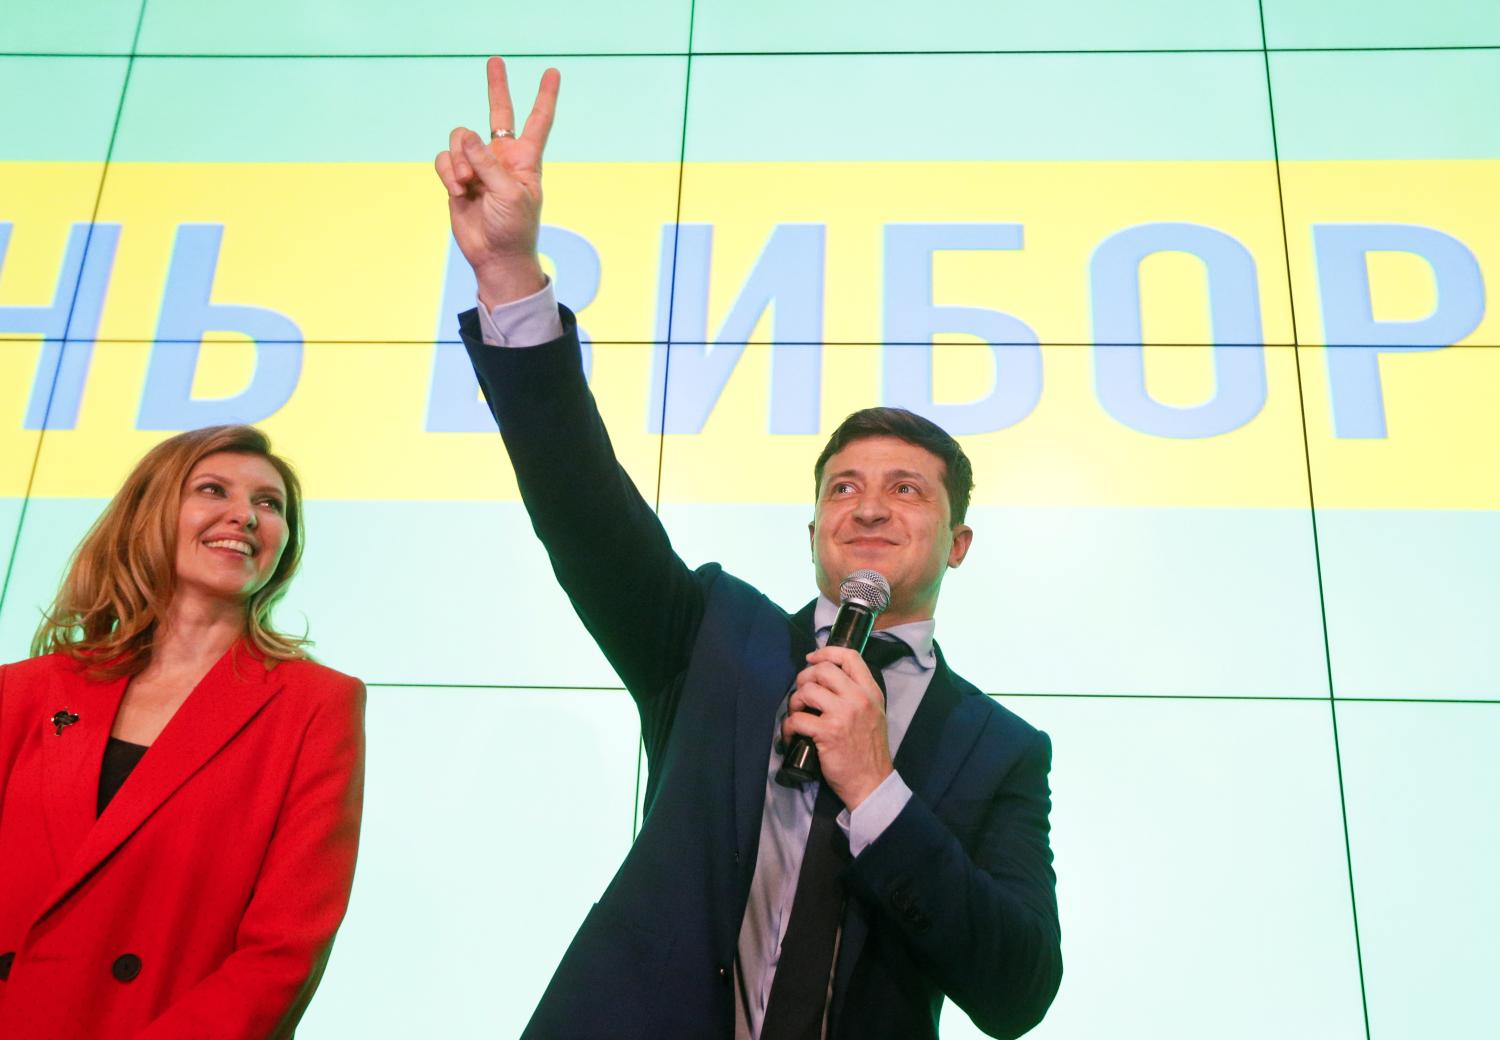 Ukrainian comic actor and presidential candidate Volodymyr Zelenskiy flashes a victory sign as his wife Olena reacts following the announcement of the first exit poll in a presidential election at his campaign headquarters in Kiev, Ukraine March 31, 2019. REUTERS/Valentyn Ogirenko - RC1FE0F095A0